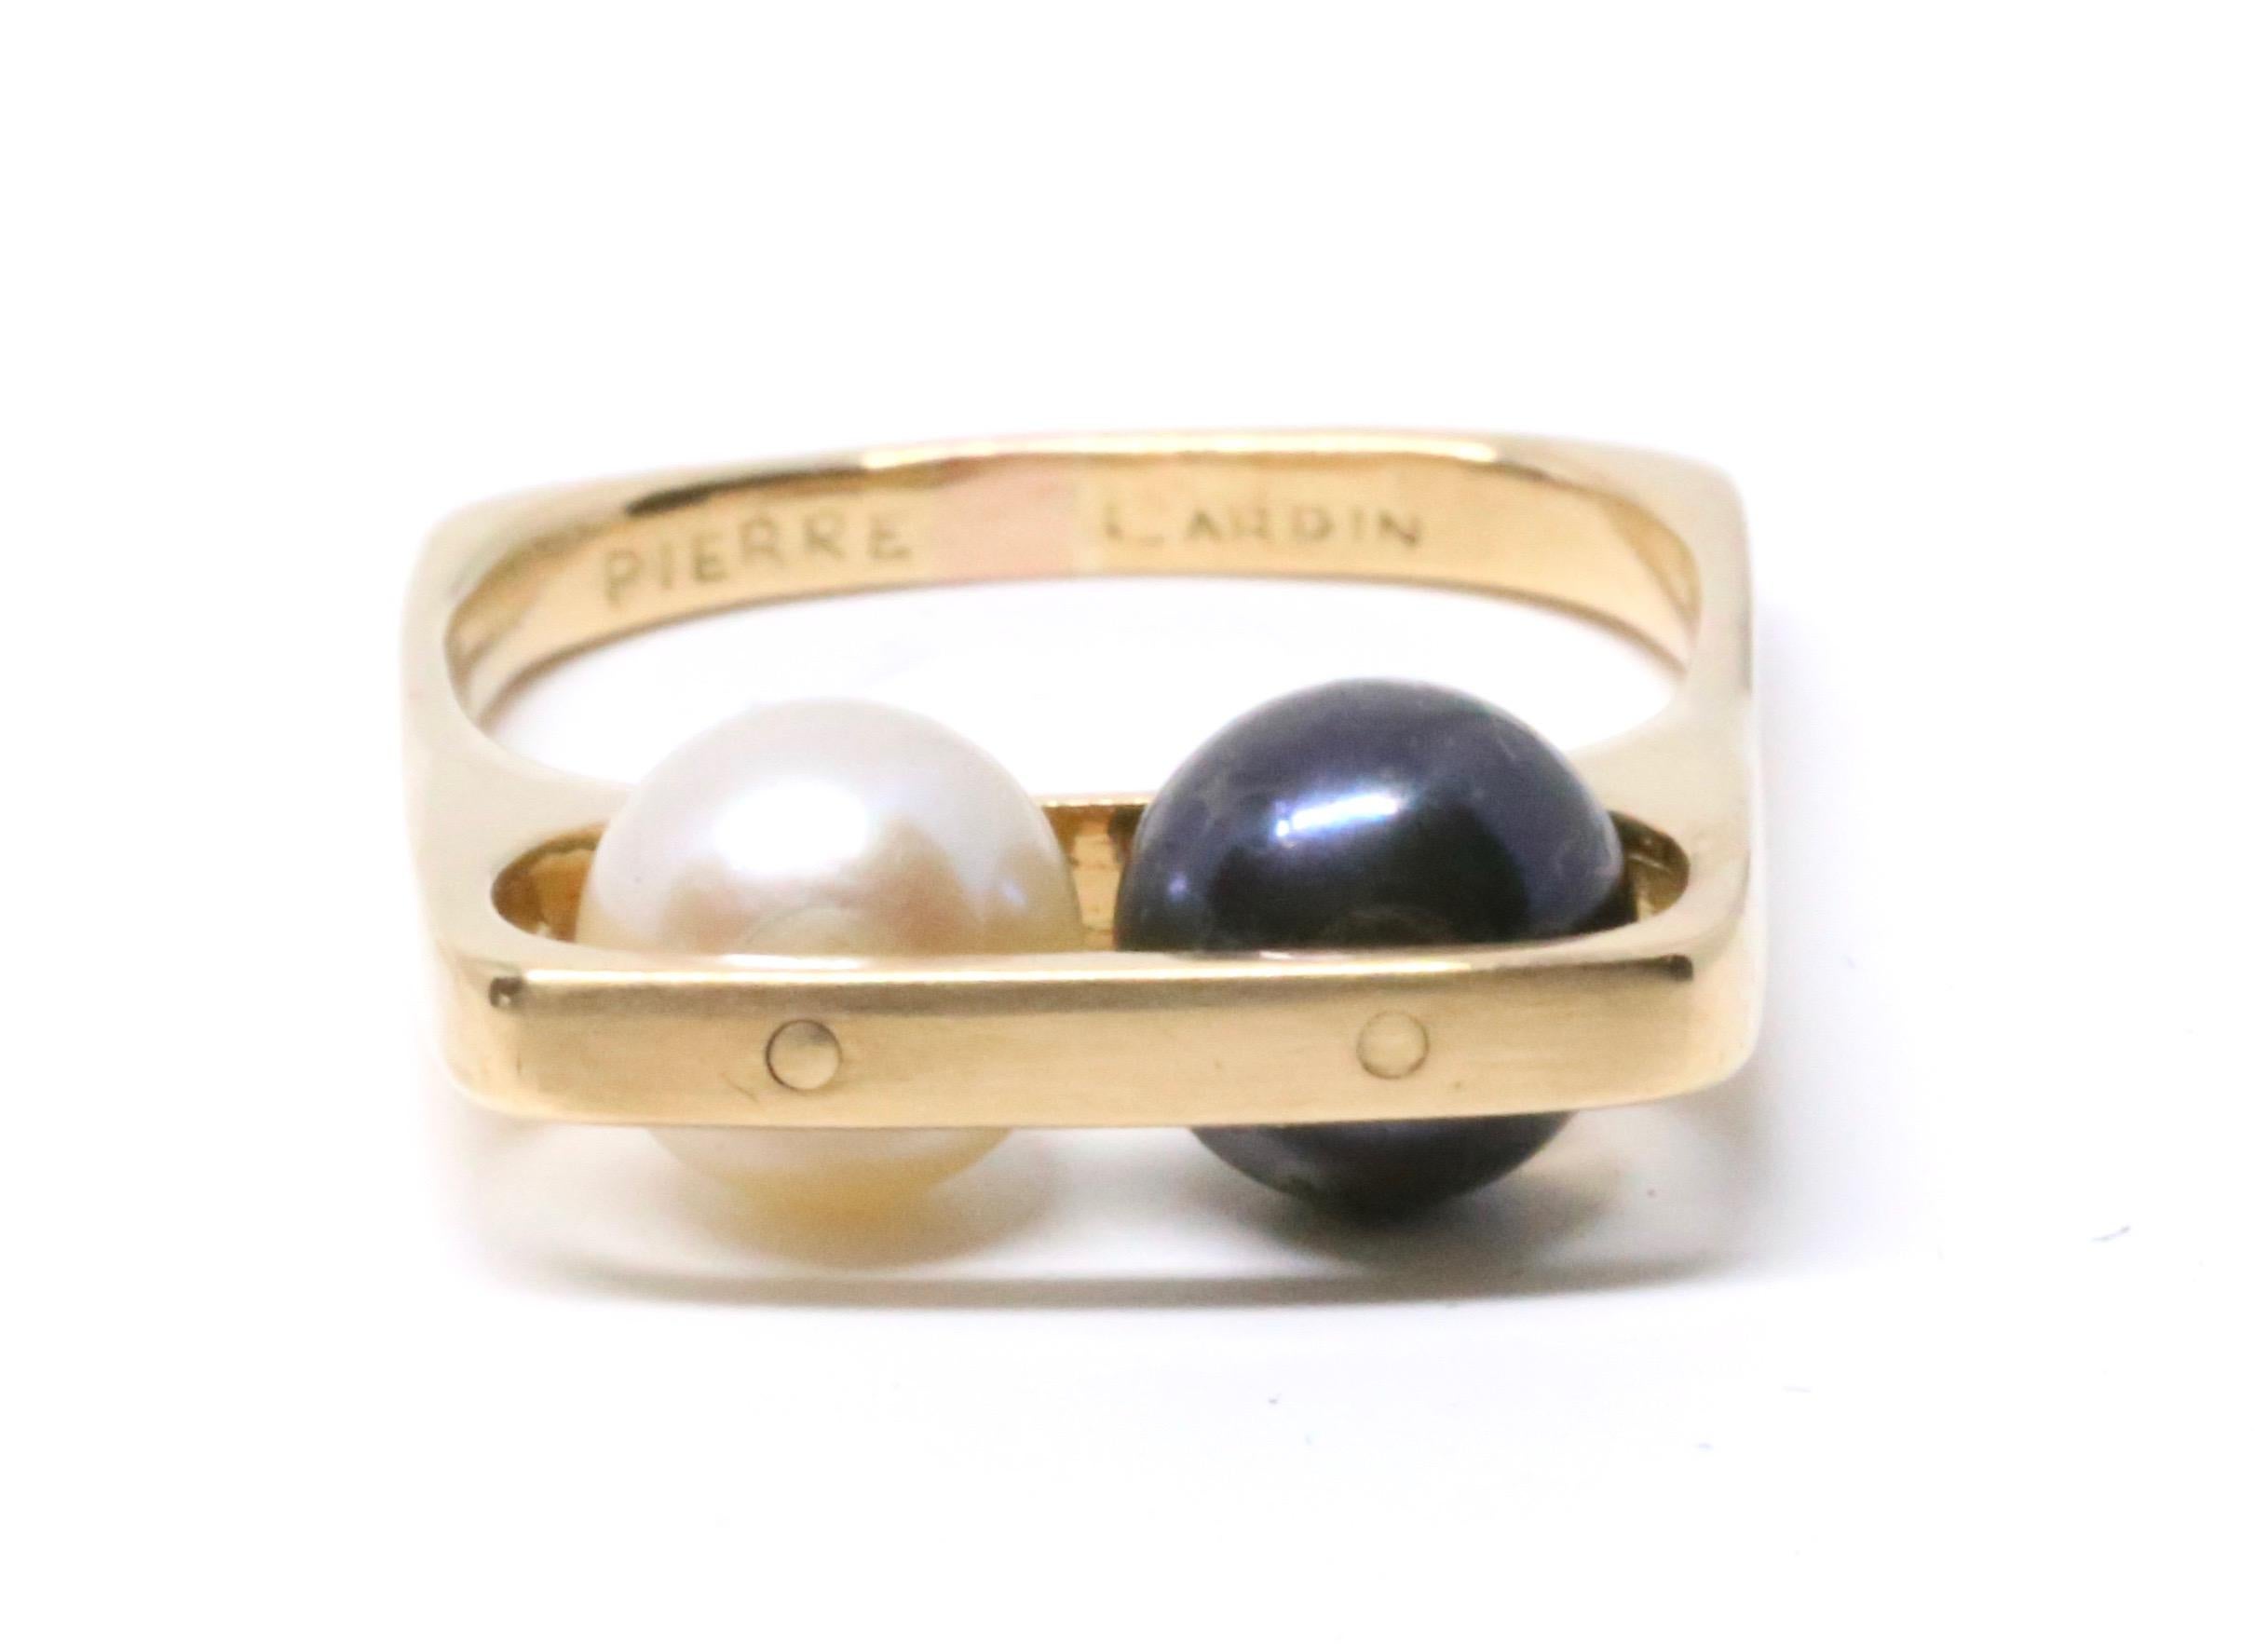 Modernist 1960s Jean Dinh Van for Pierre Cardin 18 Karat Gold Ring with Movable Pearls